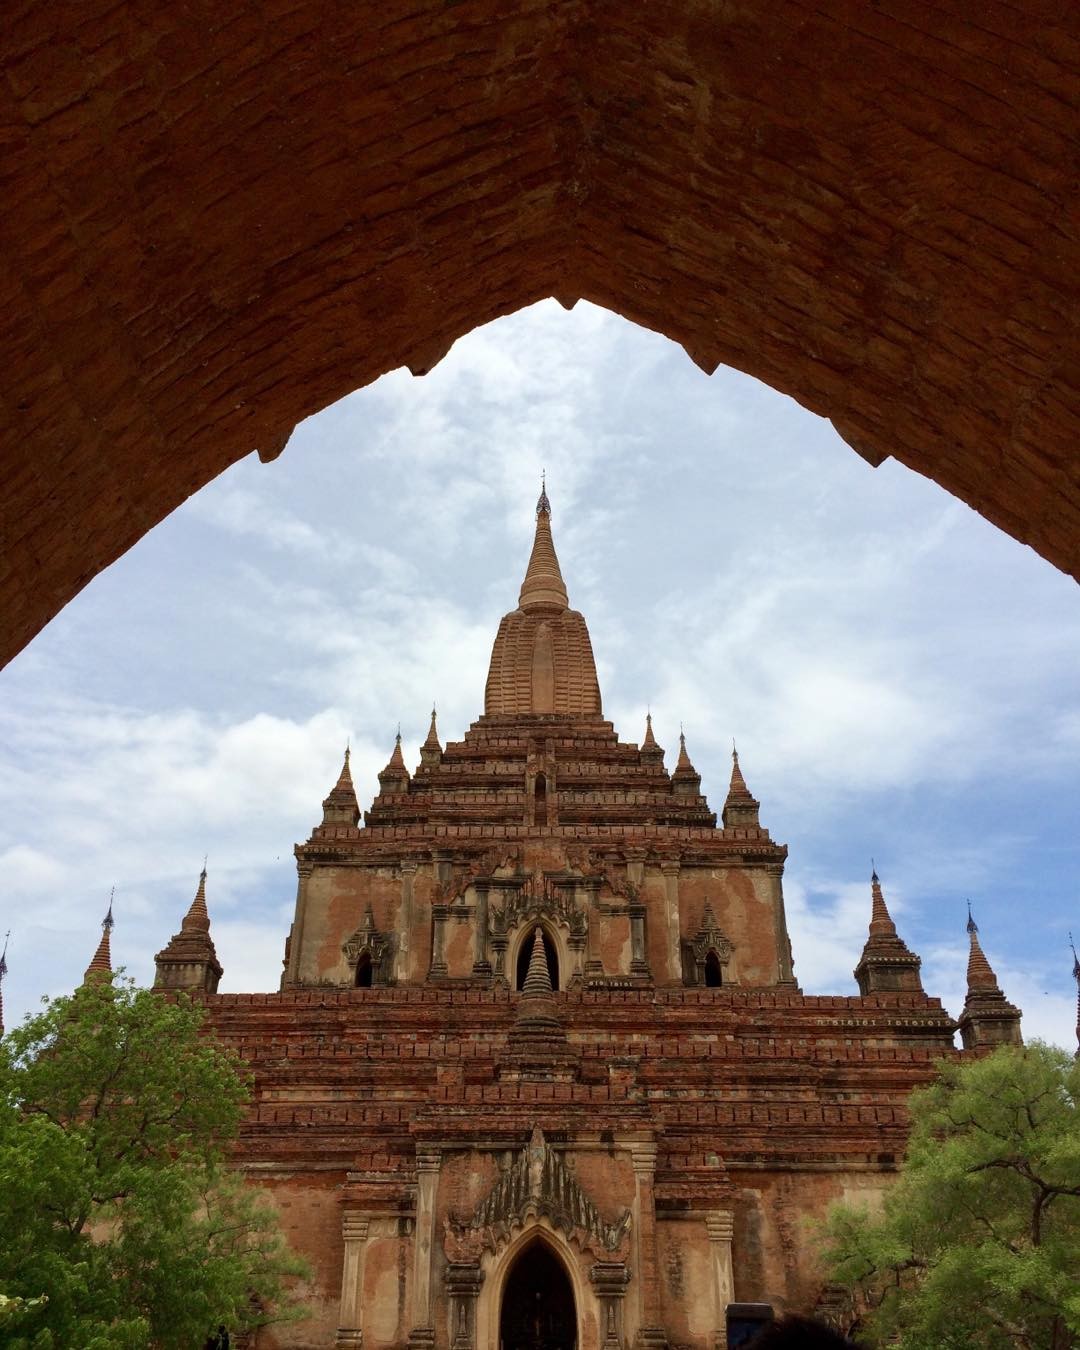 The temples of Bagan, Myanmar 🇲🇲.
.
Over 3000 temples still dot the landscape of the original 10,000 that were built between the 9th and 13th century. Most photos show the temples from the sky at dawn or dusk, but the size of the temples can only be appreciated when looking up.
.

#Bagan #Myanmar #NyaungU #temple #temples #stumpa #monastery #ground #sky #Buddhism #travel #backpack #backpacker #tourism #religion